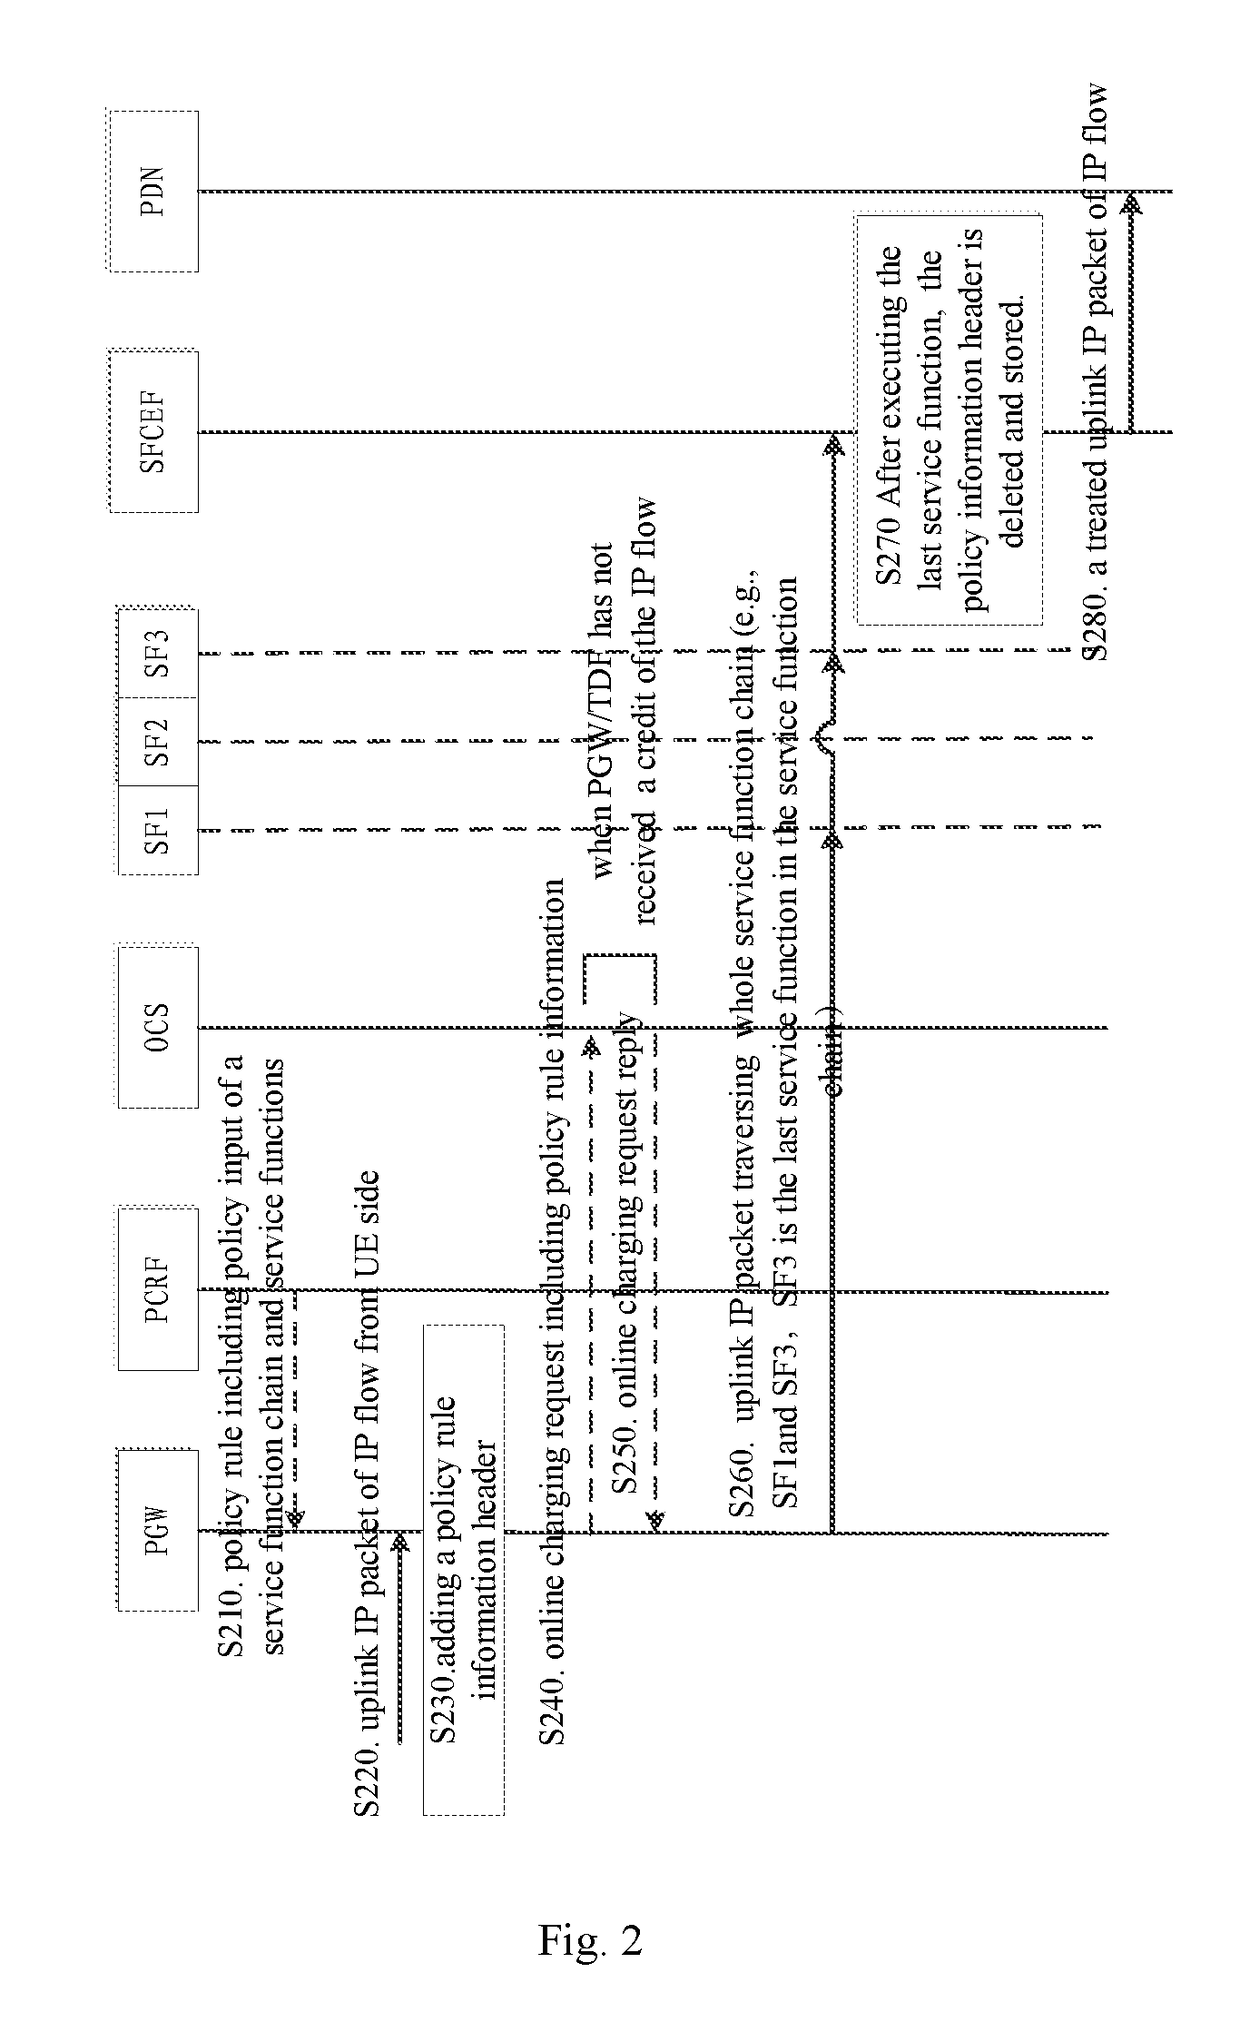 Methods and apparatuses of service function chain based on pcc architecture